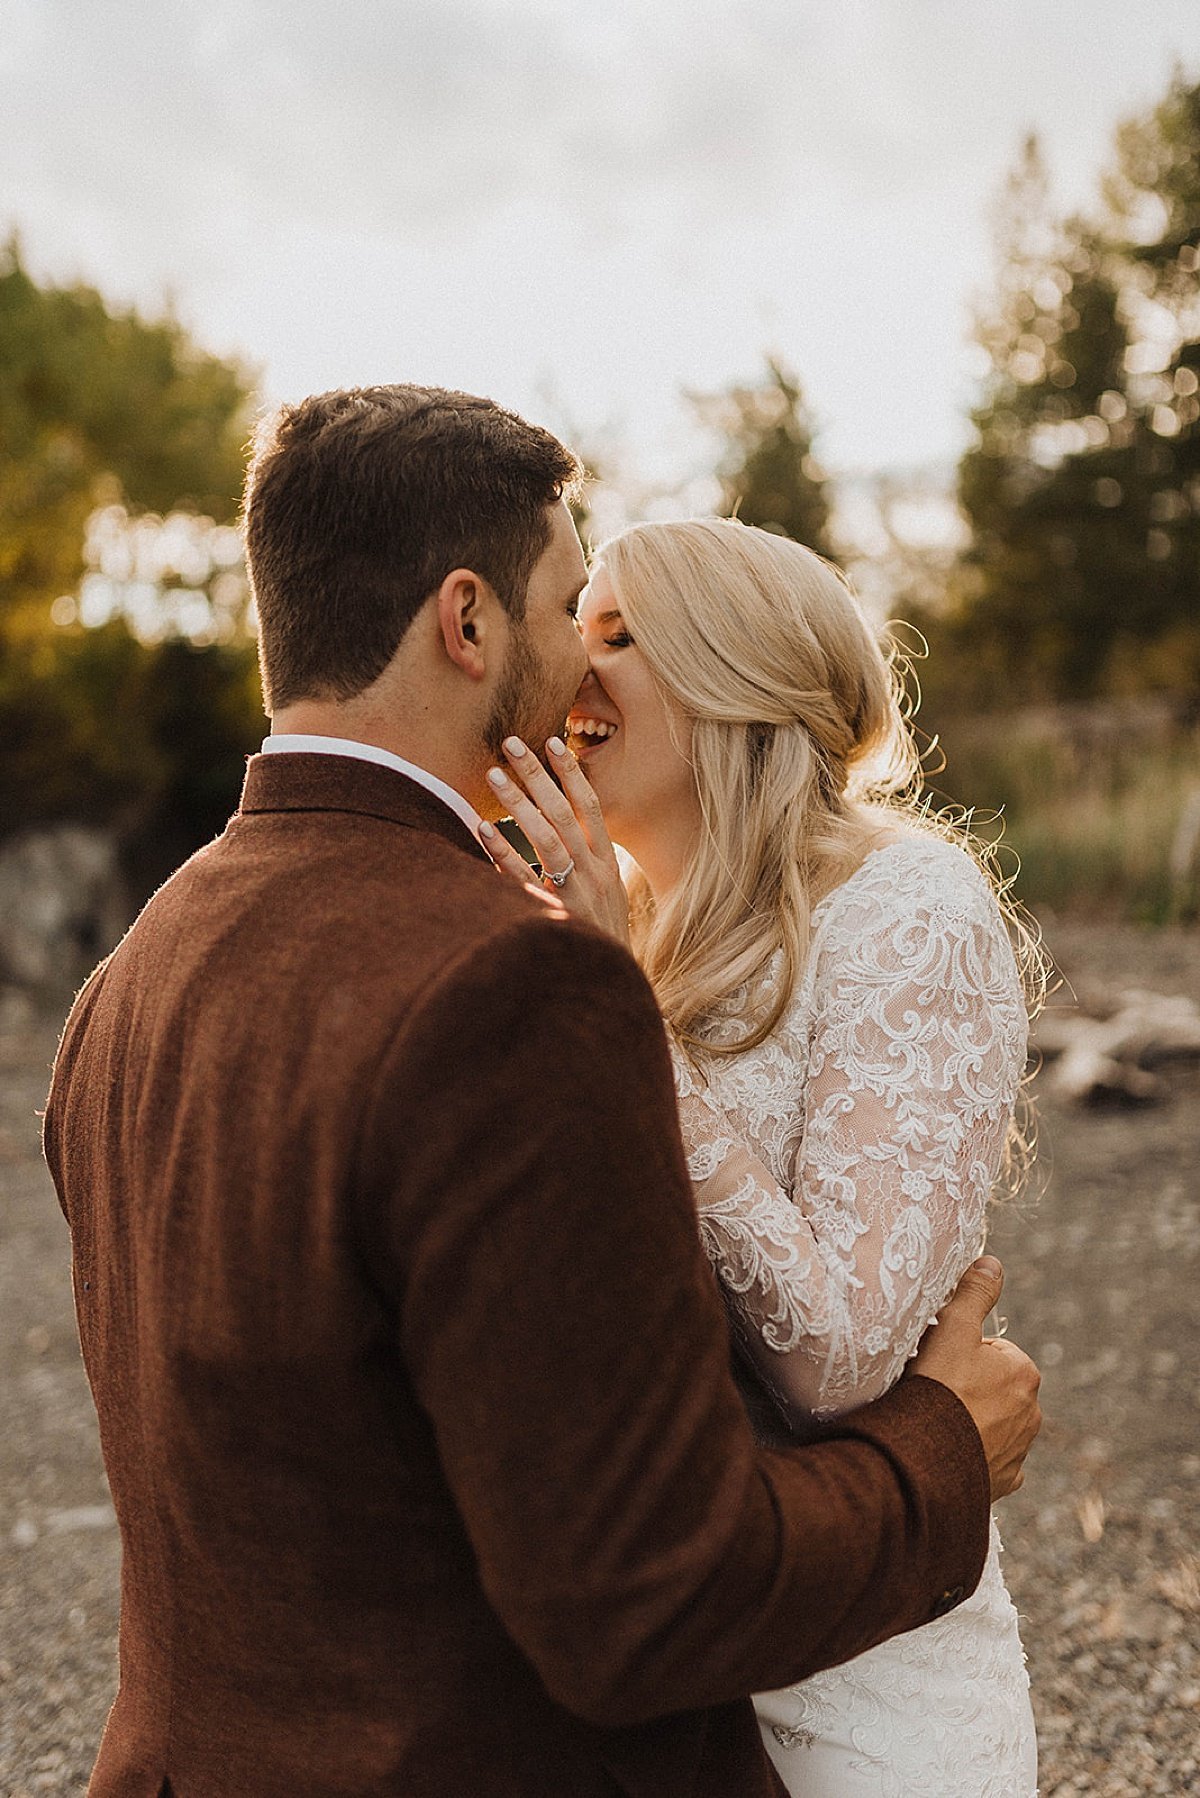  newlywed bride and groom share a kiss during golden hour at outdoor girdwood, ak wedding shot by theresa mcdonald photography 